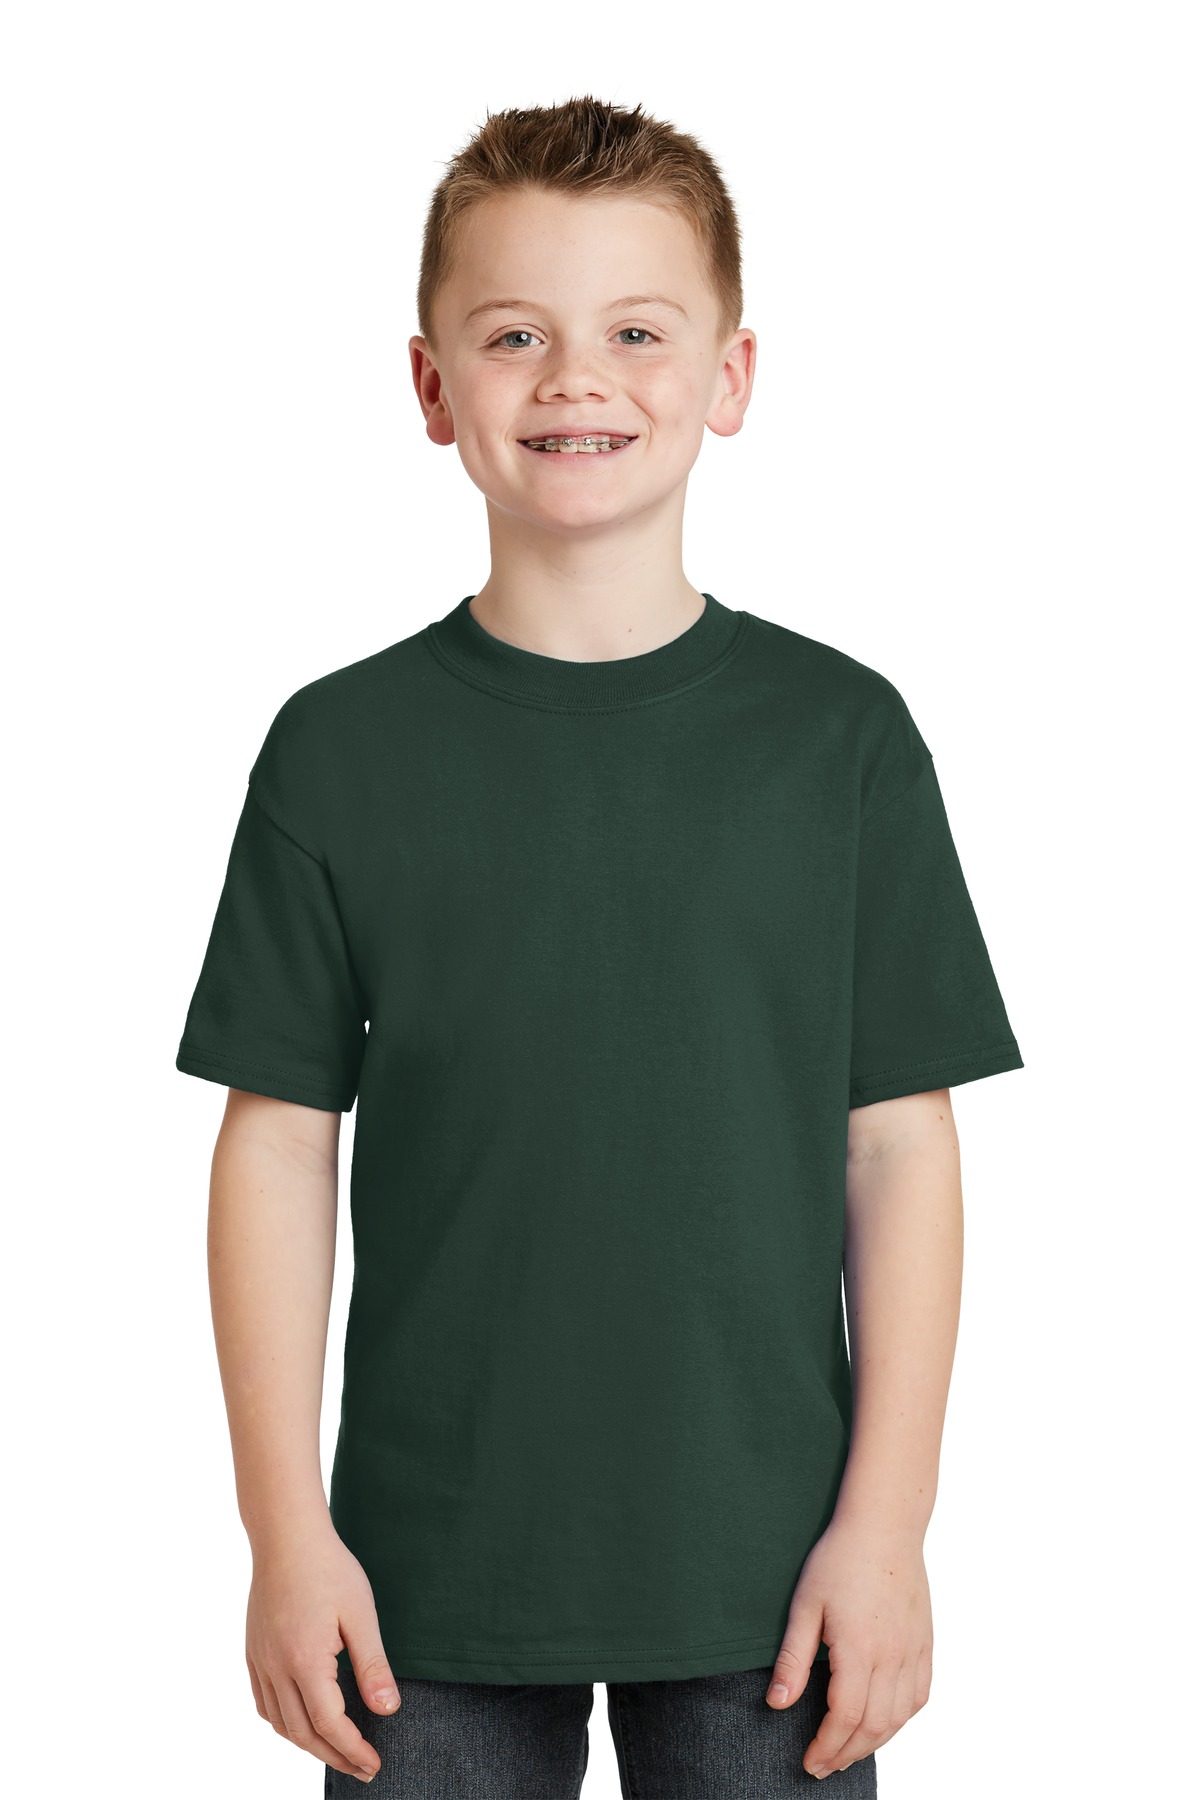 Hanes  -  Youth Beefy-T 100% Cotton T-Shirt.  5380